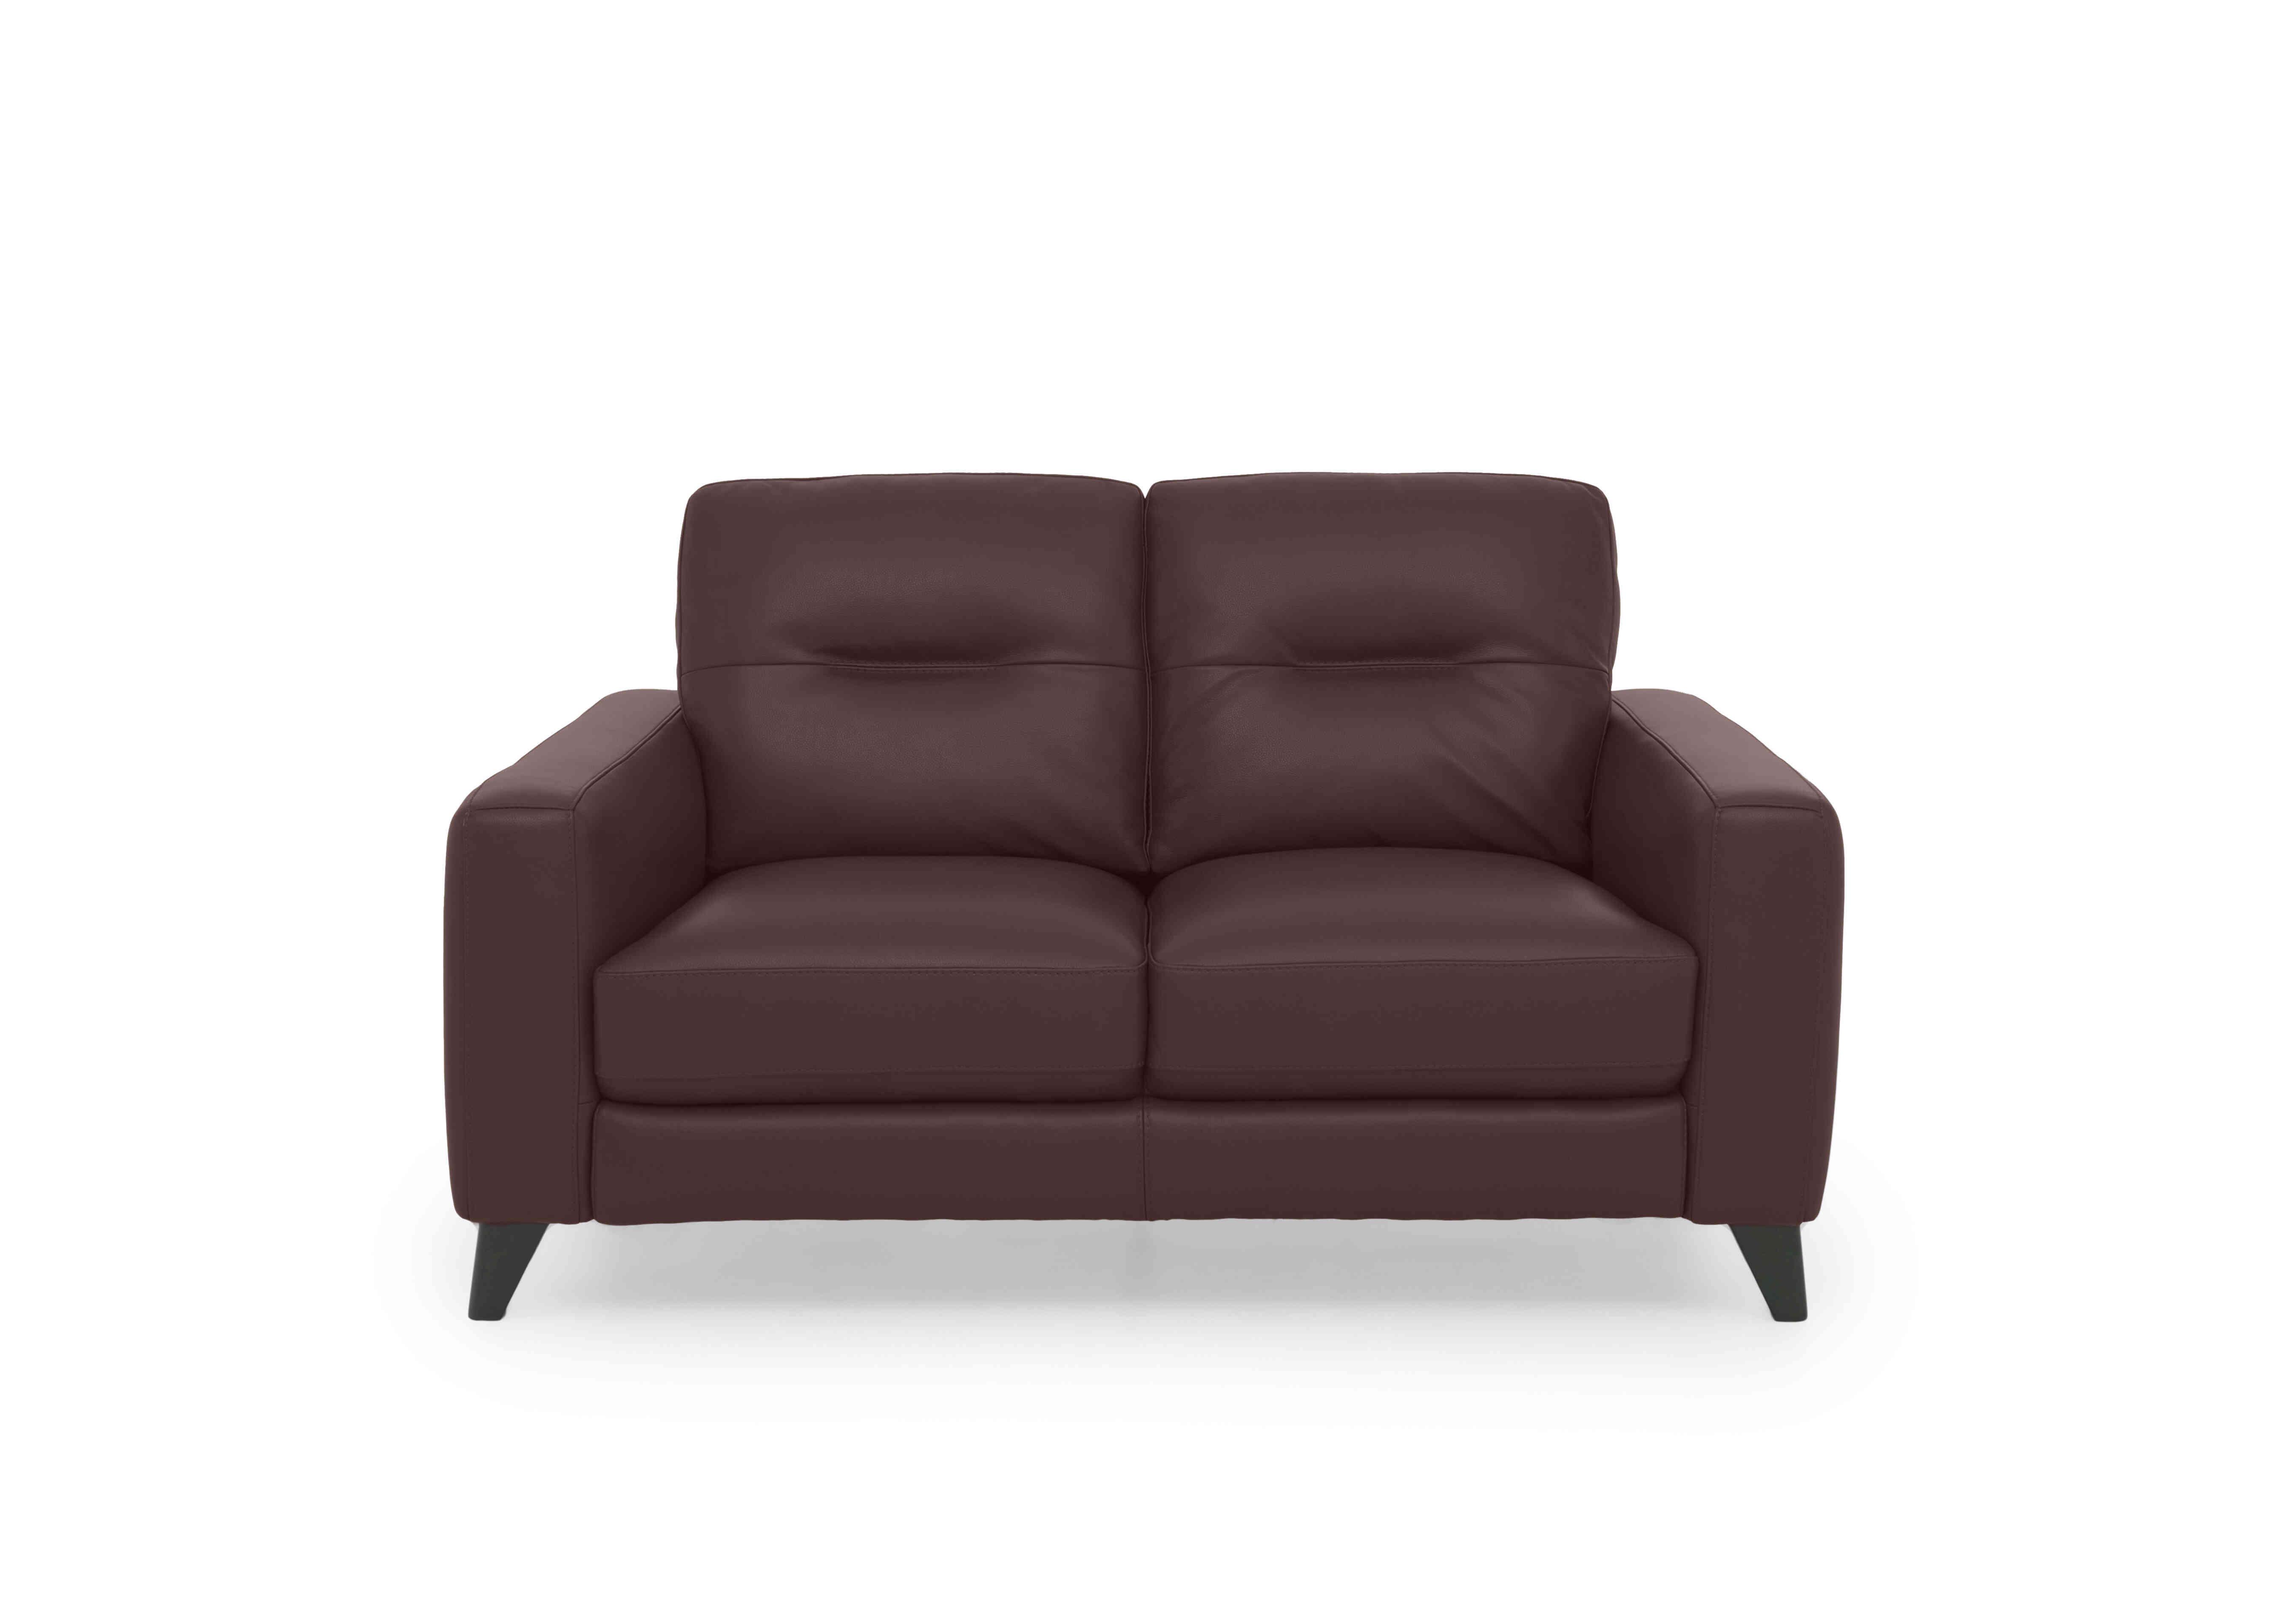 Jules 2 Seater Leather Sofa in An-751b Burgundy on Furniture Village